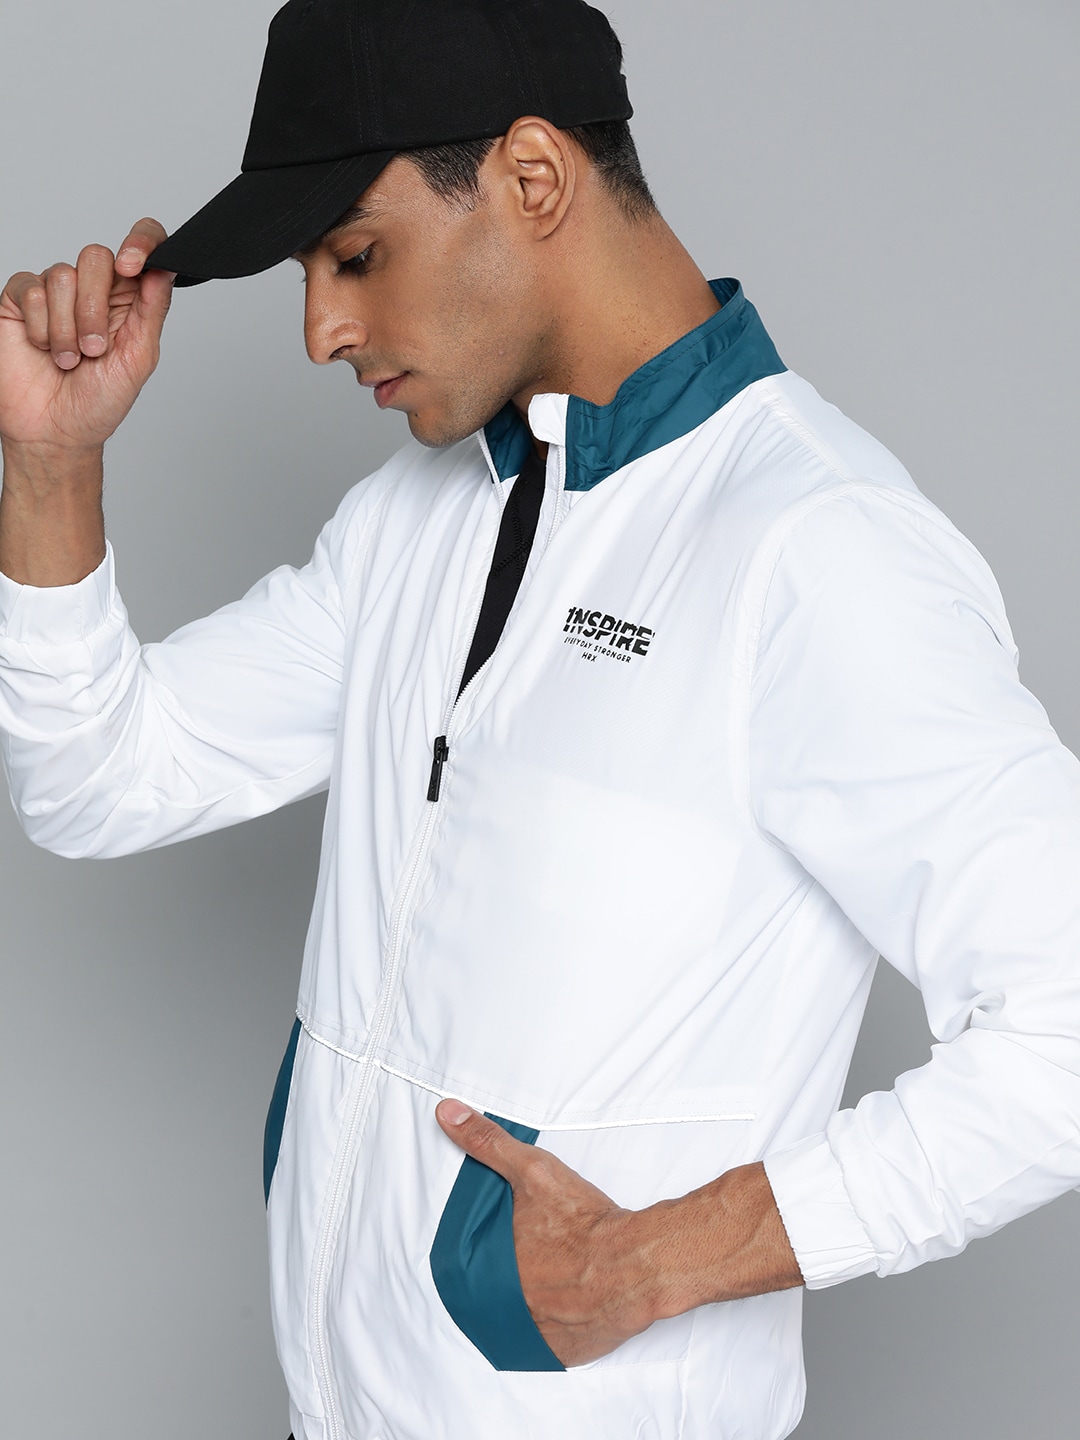 HRX Puffer jackets for Men sale - discounted price | FASHIOLA INDIA-calidas.vn